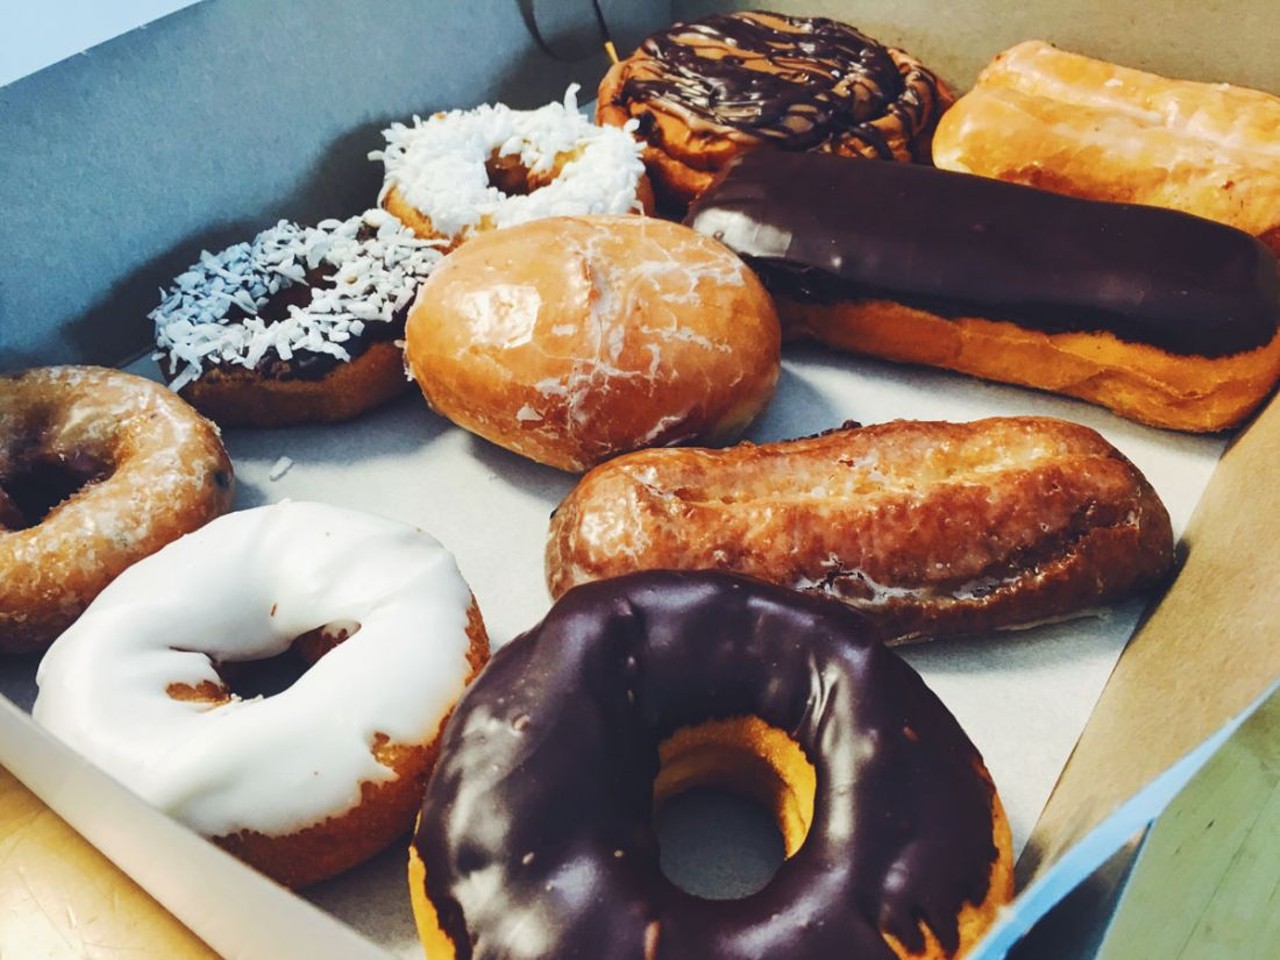 Long johns, iced donuts, cake donuts, sugar donuts, fruit-filled donuts, custard-filled donuts, cinnamon twists, apple fritters....they have it all at Eddie's Southtown Donuts.